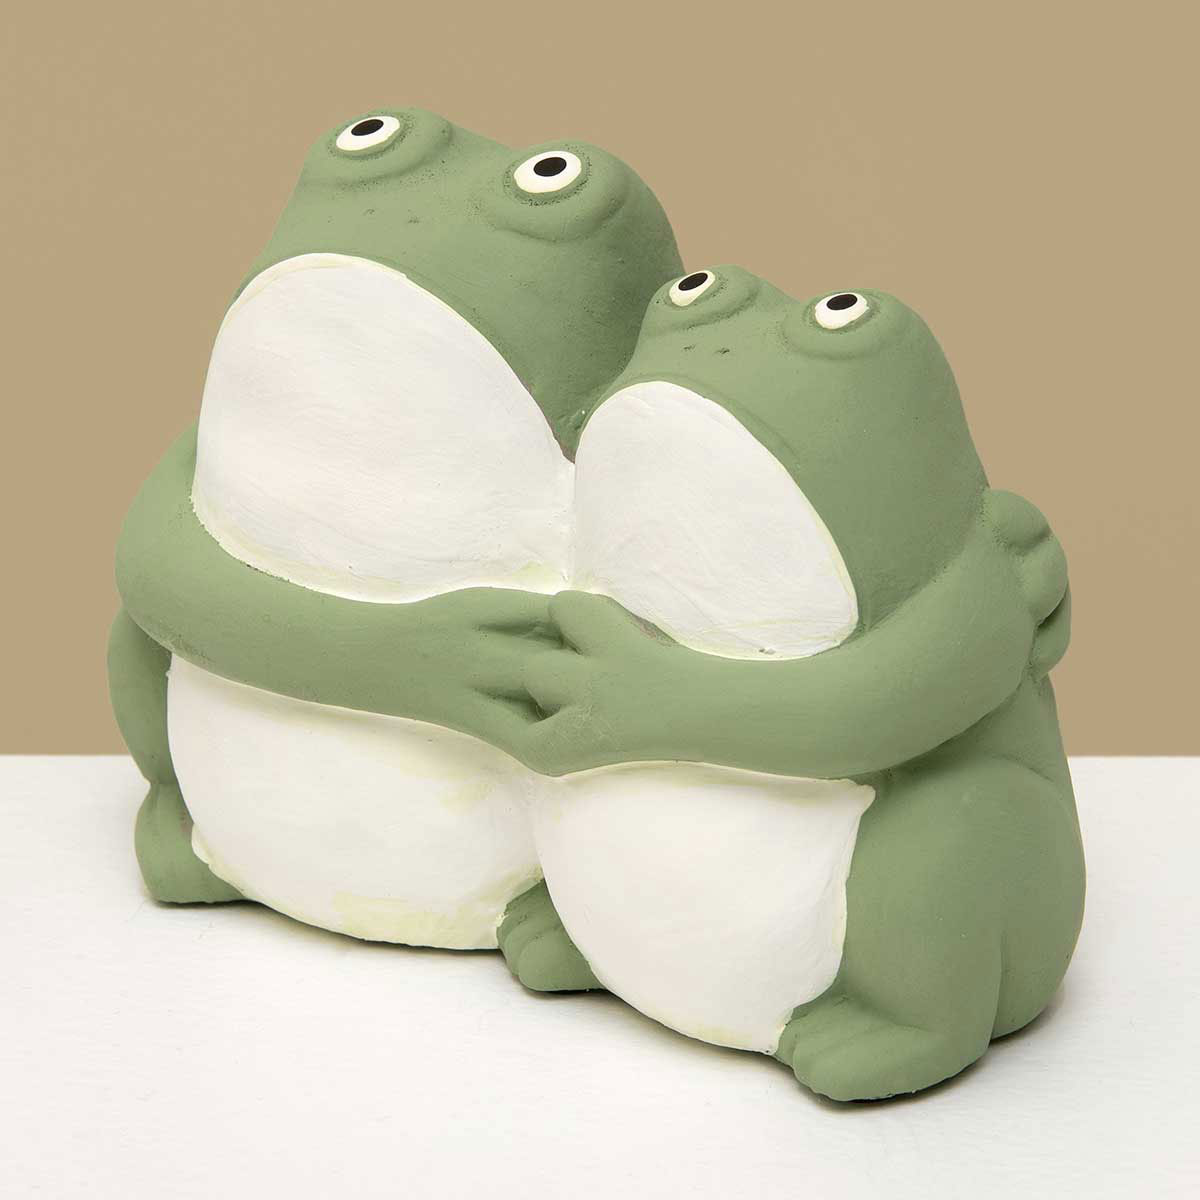 HUGGING FROGS 5.75IN X 3.25IN X 4.25IN GREEN/WHITE CONCRETE - Click Image to Close